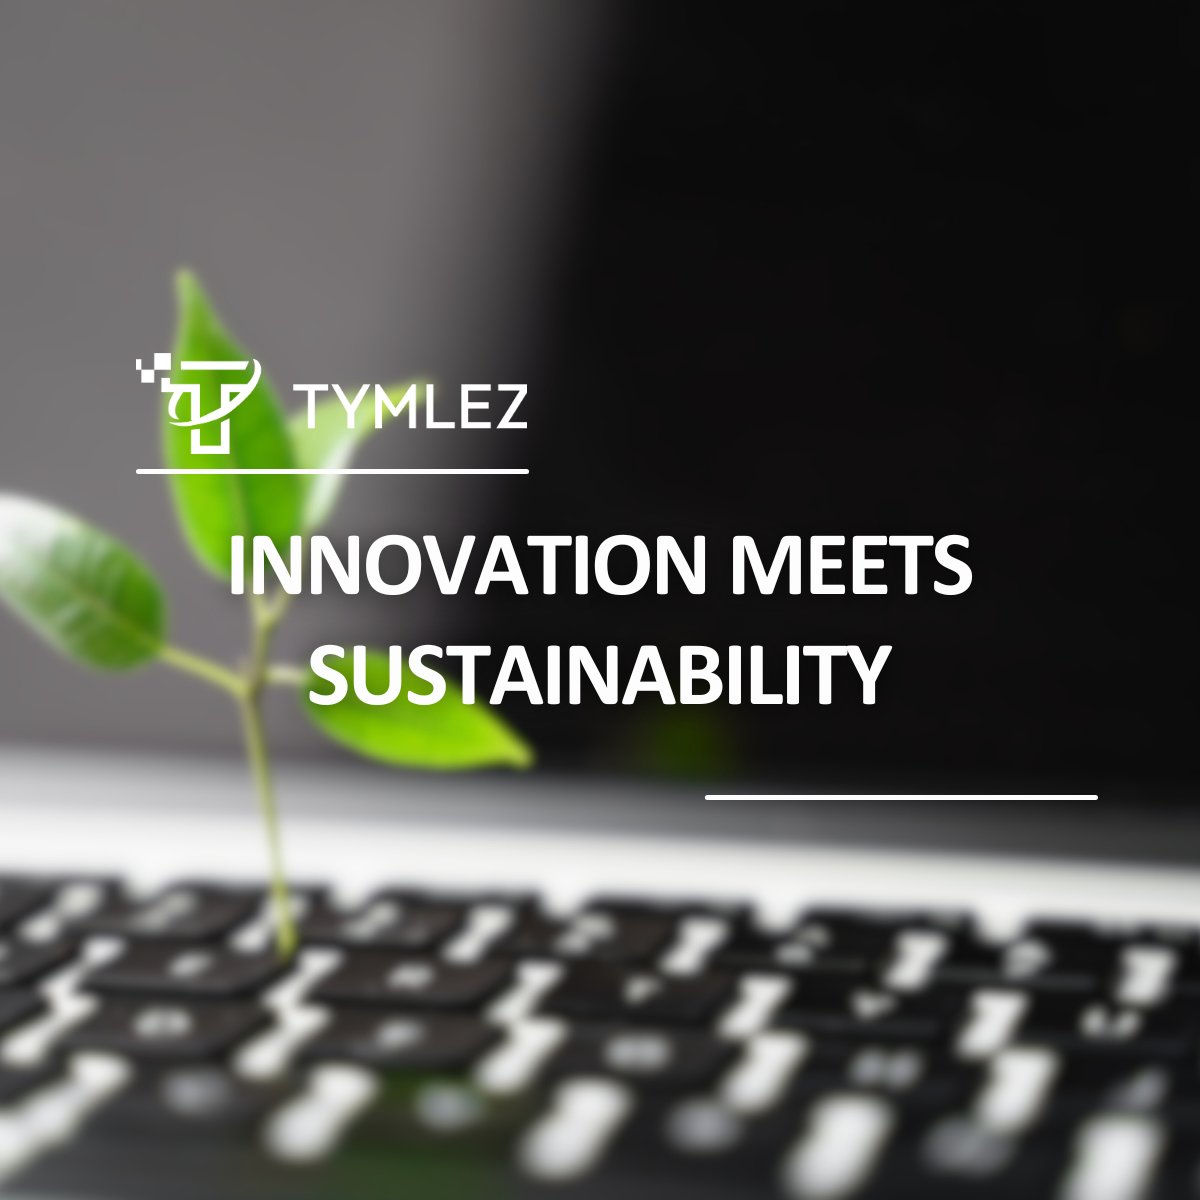 Carbon Central's innovative #Technology offers the tools and insights needed to transform #BusinessOperations into more sustainable ones. Discover how we can help your business: tymlez.com/contact #Transparency  #ESG #GreenBusiness #CarbonNeutral #CleanTech #CarbonGreen